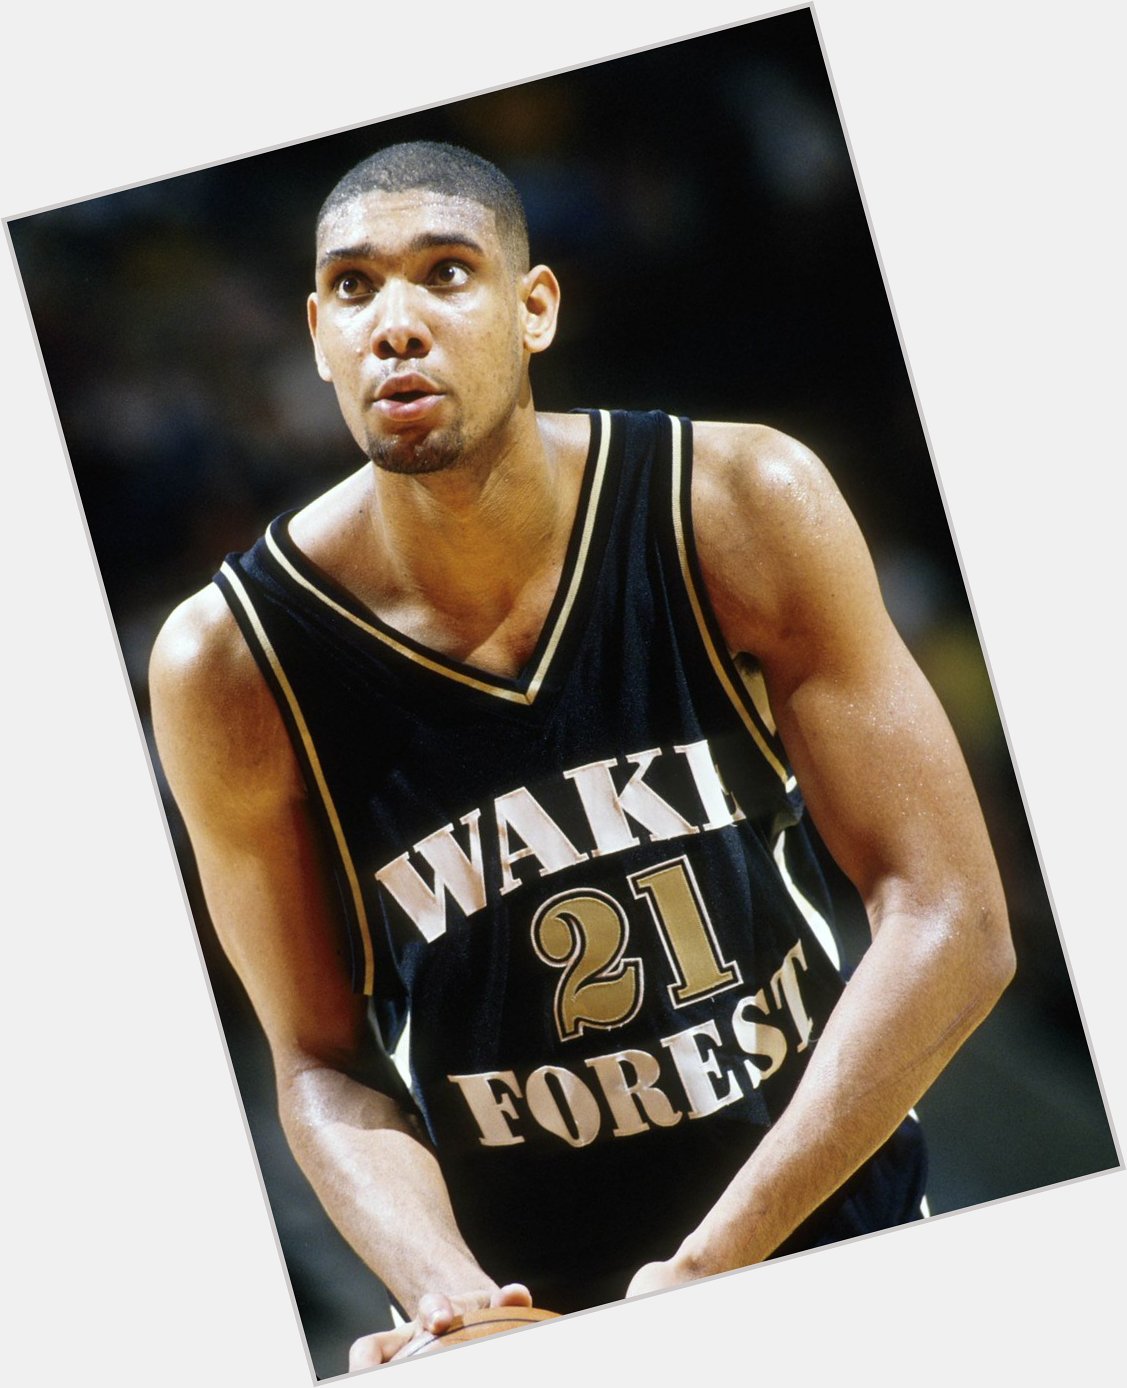 Happy birthday to future NBA Hall of Famer Tim Duncan, who turns 42 today.  